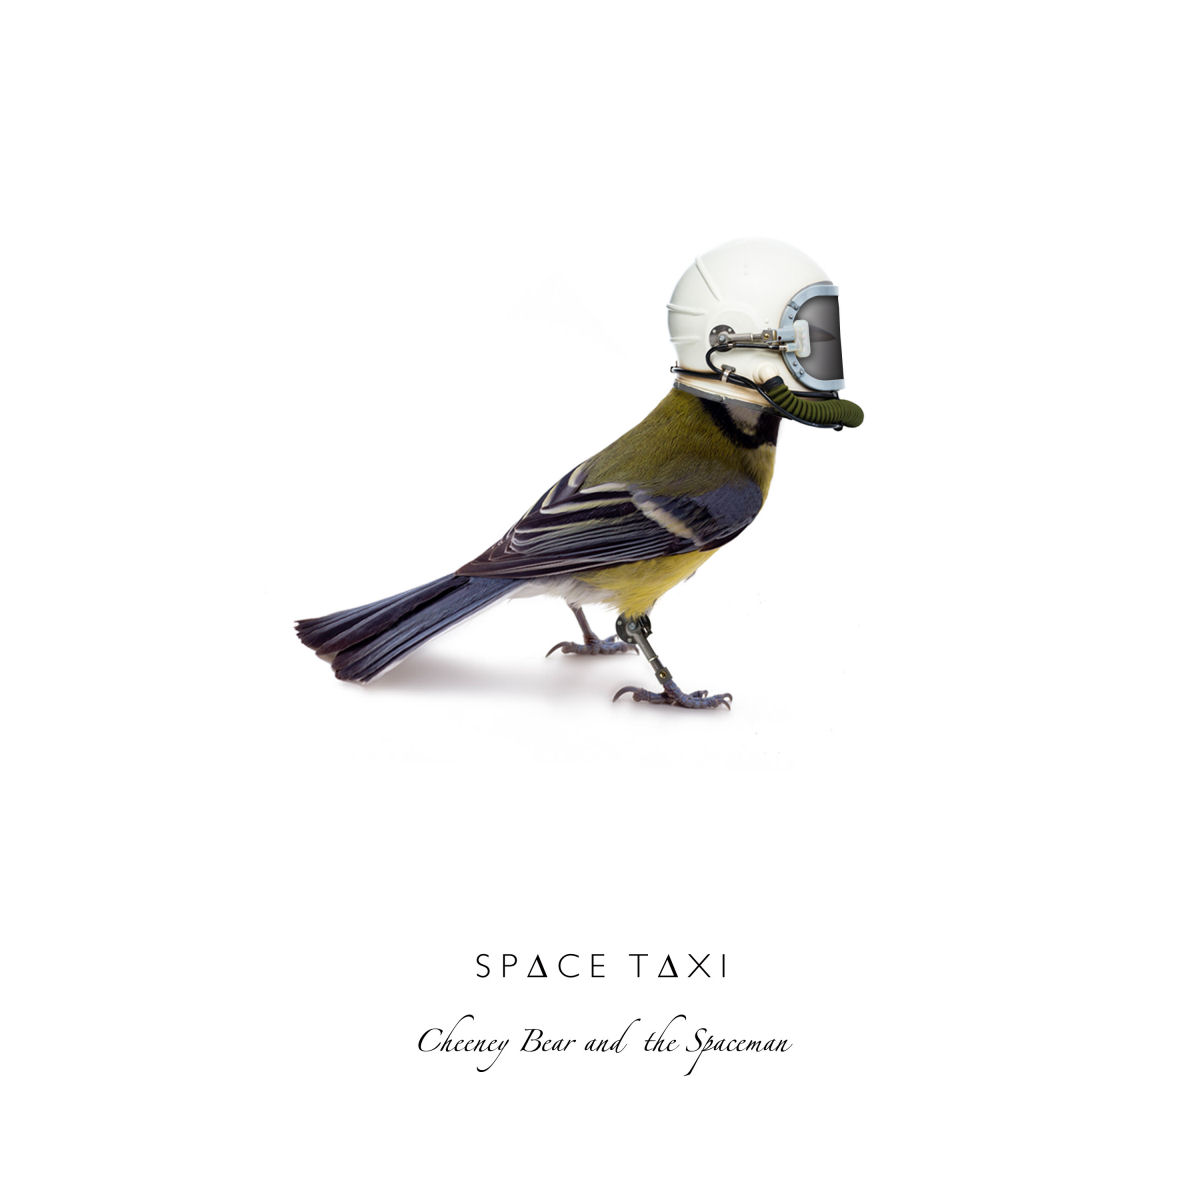  SPACE TAXI – Cheeney Bear And The Spaceman